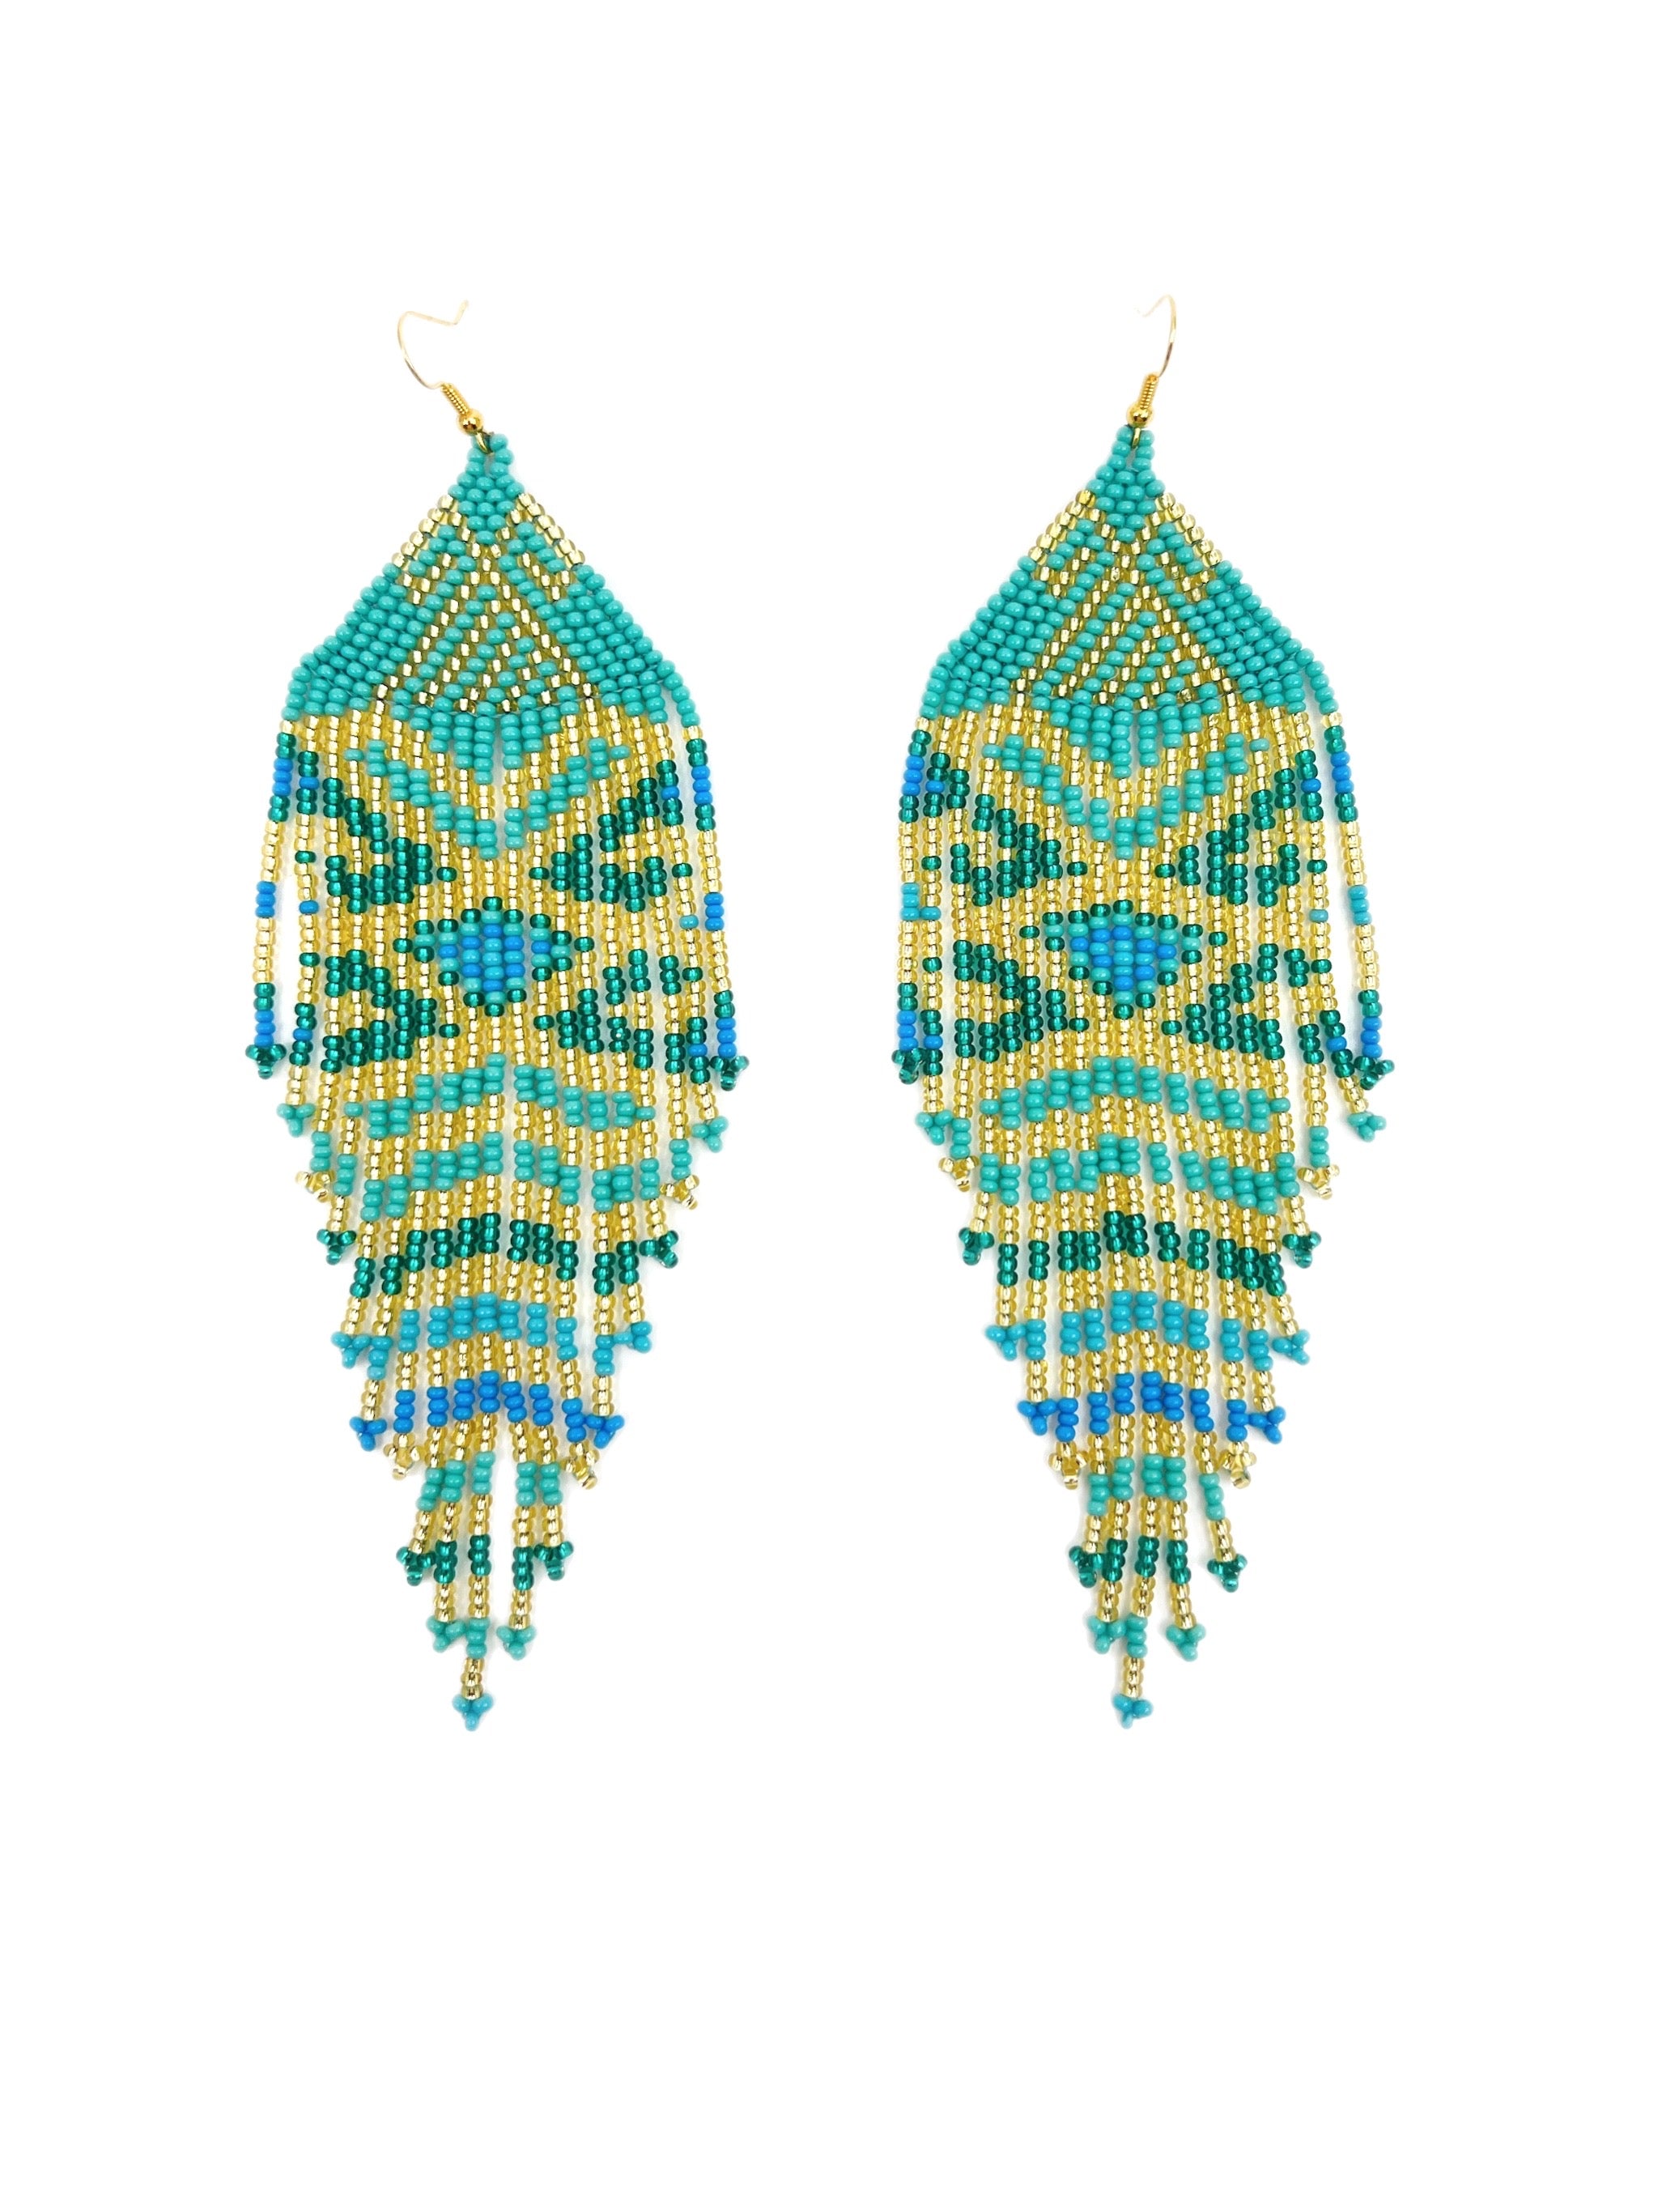 WAVES OF LIFE #04 | TURQUOISE & GOLD